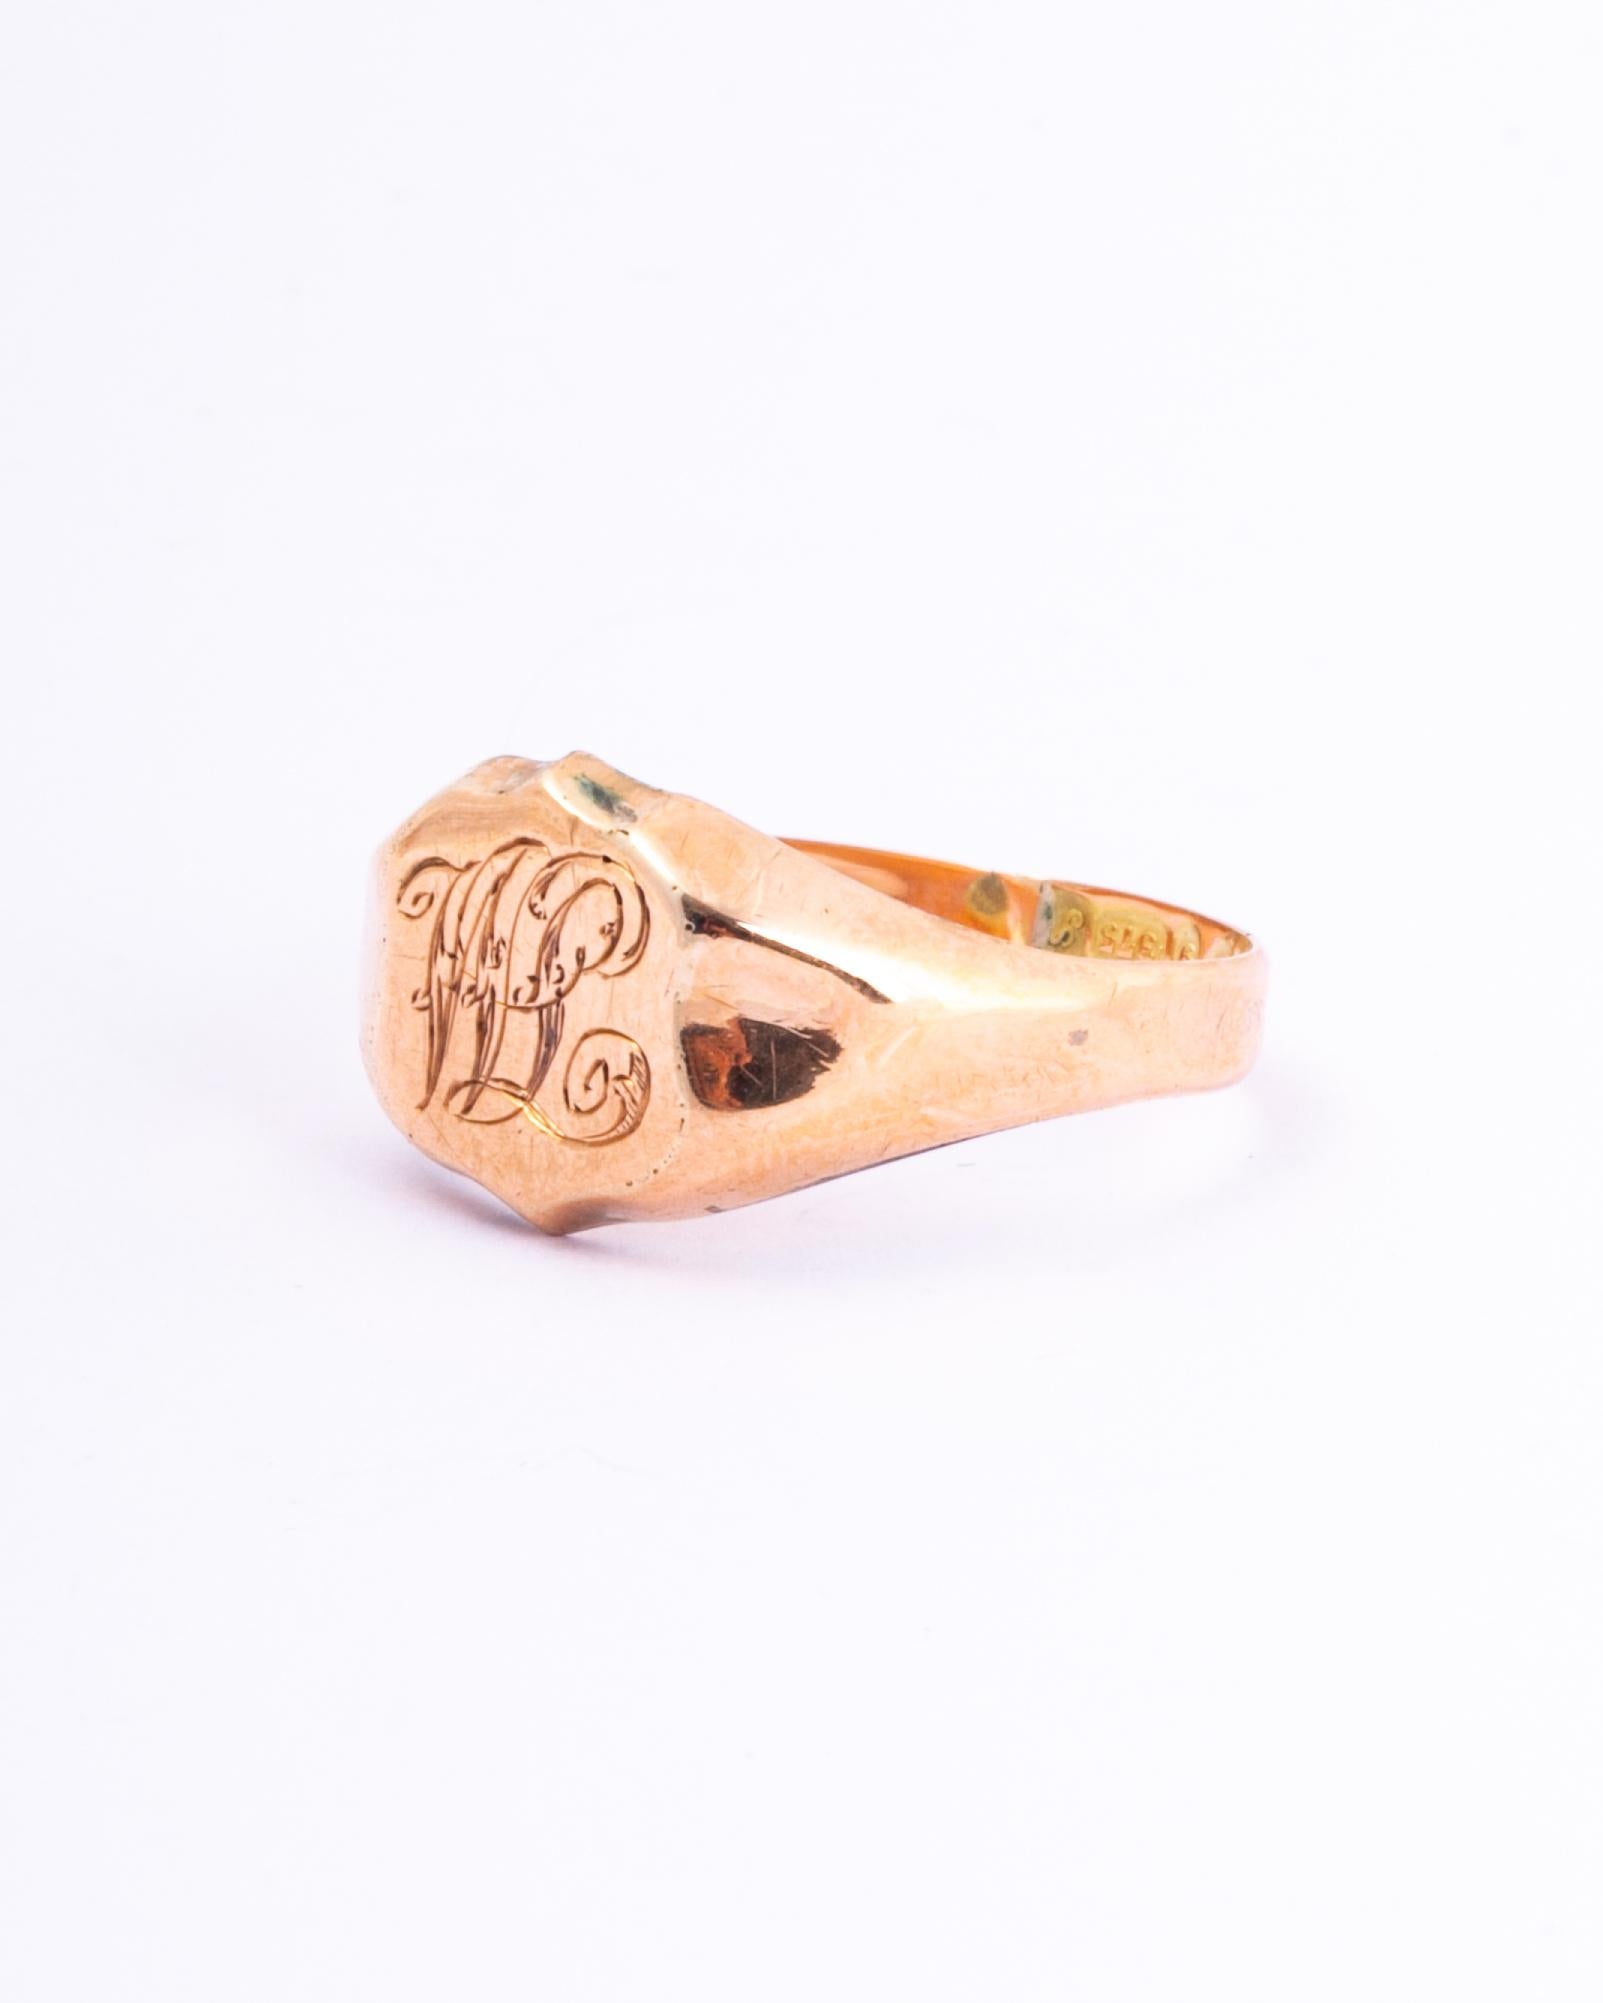 The fluid scroll font which reads 'WL' is finely engraved onto the main shield panel of this ring. The chunky shoulders are smooth and carry on down into a plain band modelled in 9ct gold. Made in Chester, England.

RIng Size: R 1/2 or 8 3/4
Widest